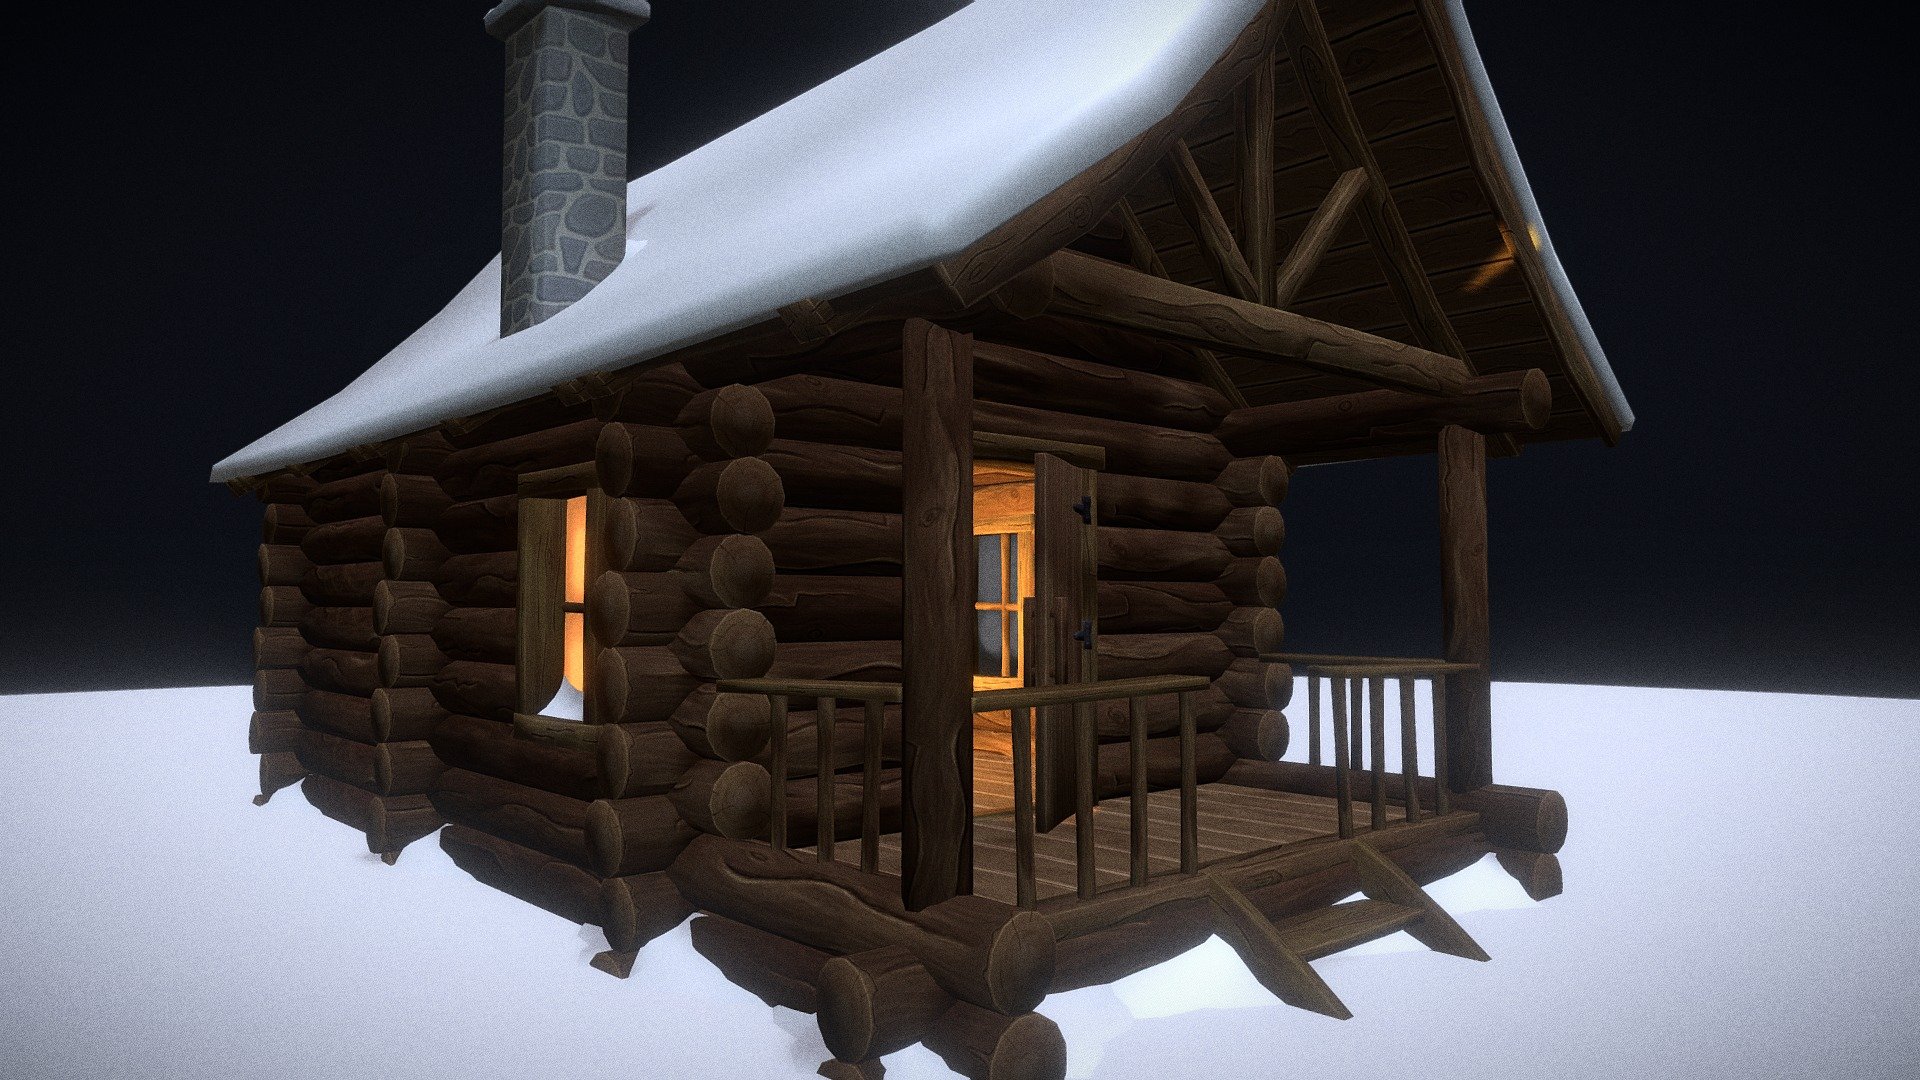 A stylized hand painted log cabin in the snow with chimney and a hearth inside.
Ideal for any christmas or winter themed projects 3d model